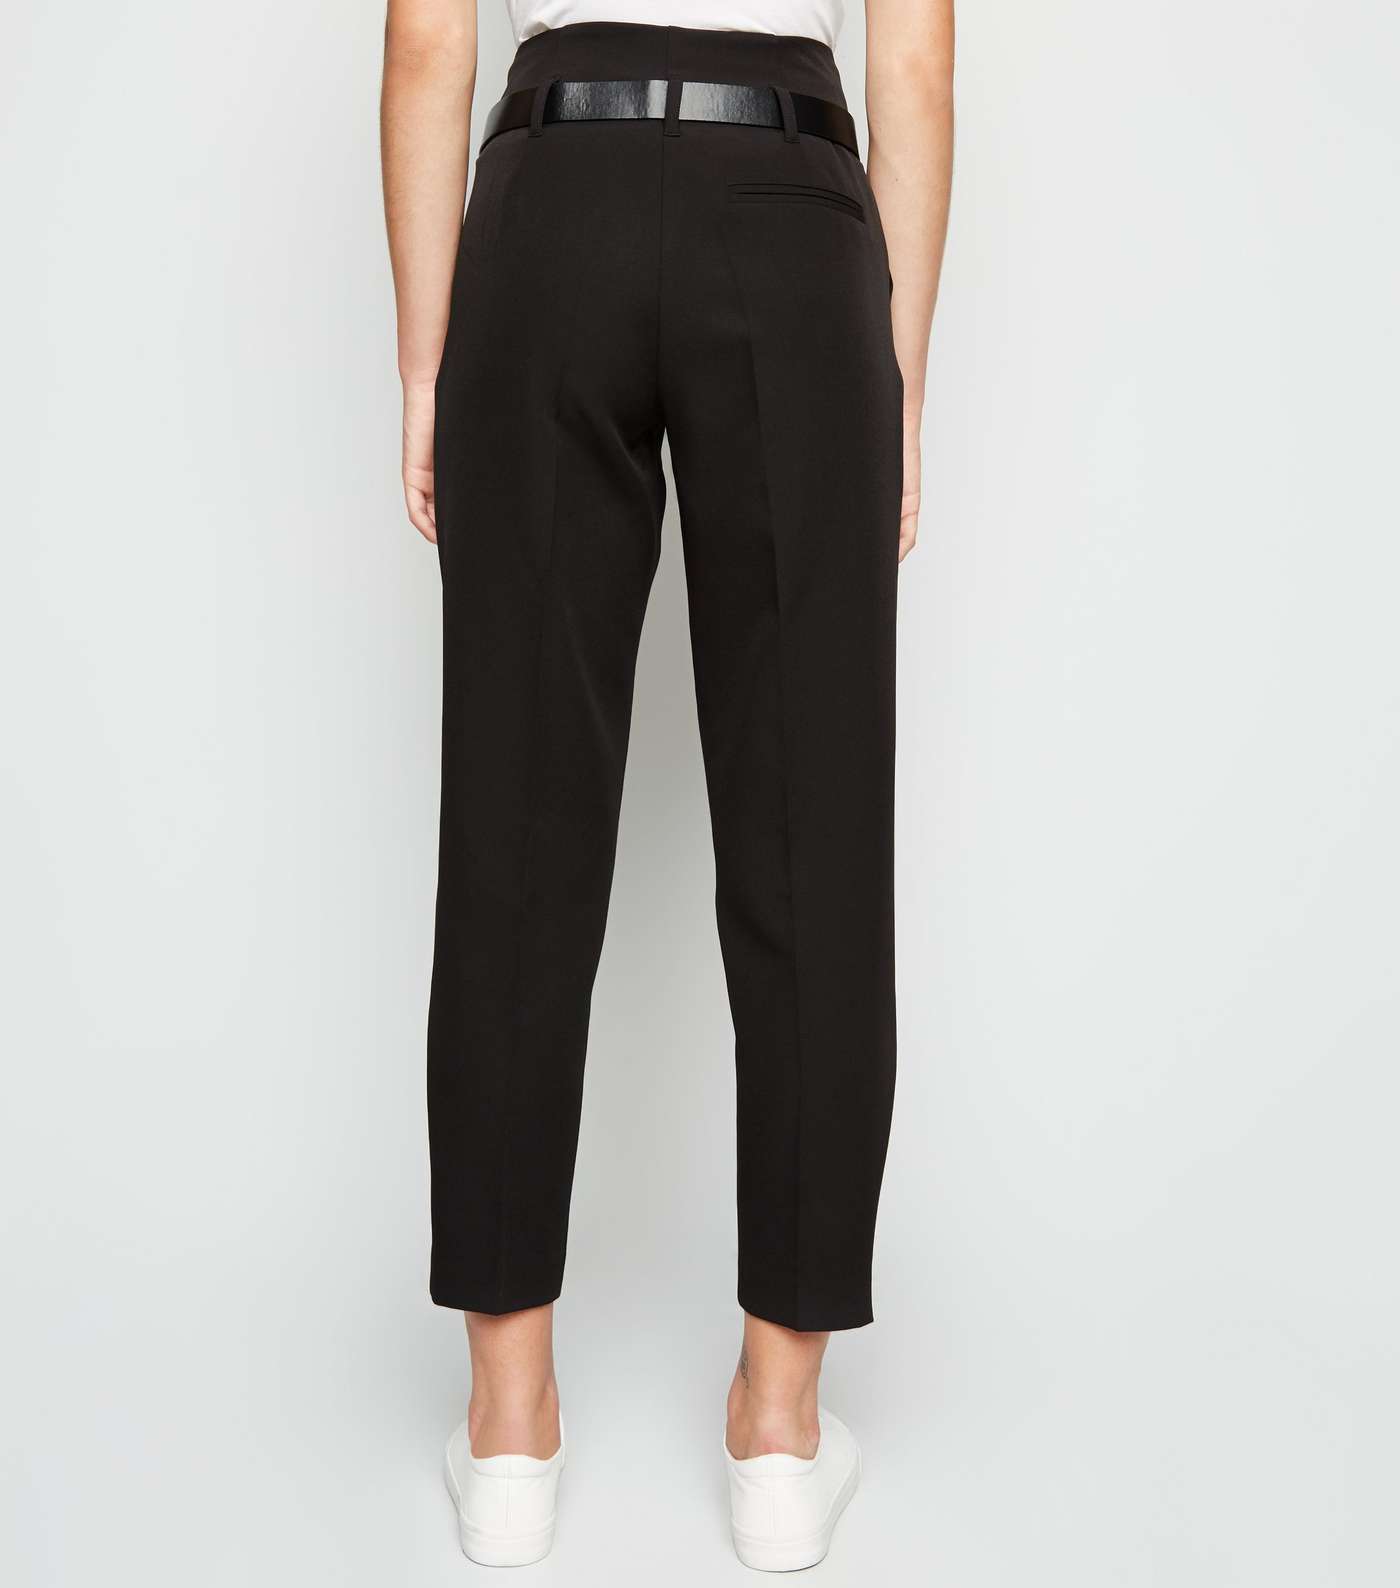 Black Belted High Waist Tapered Trousers Image 3